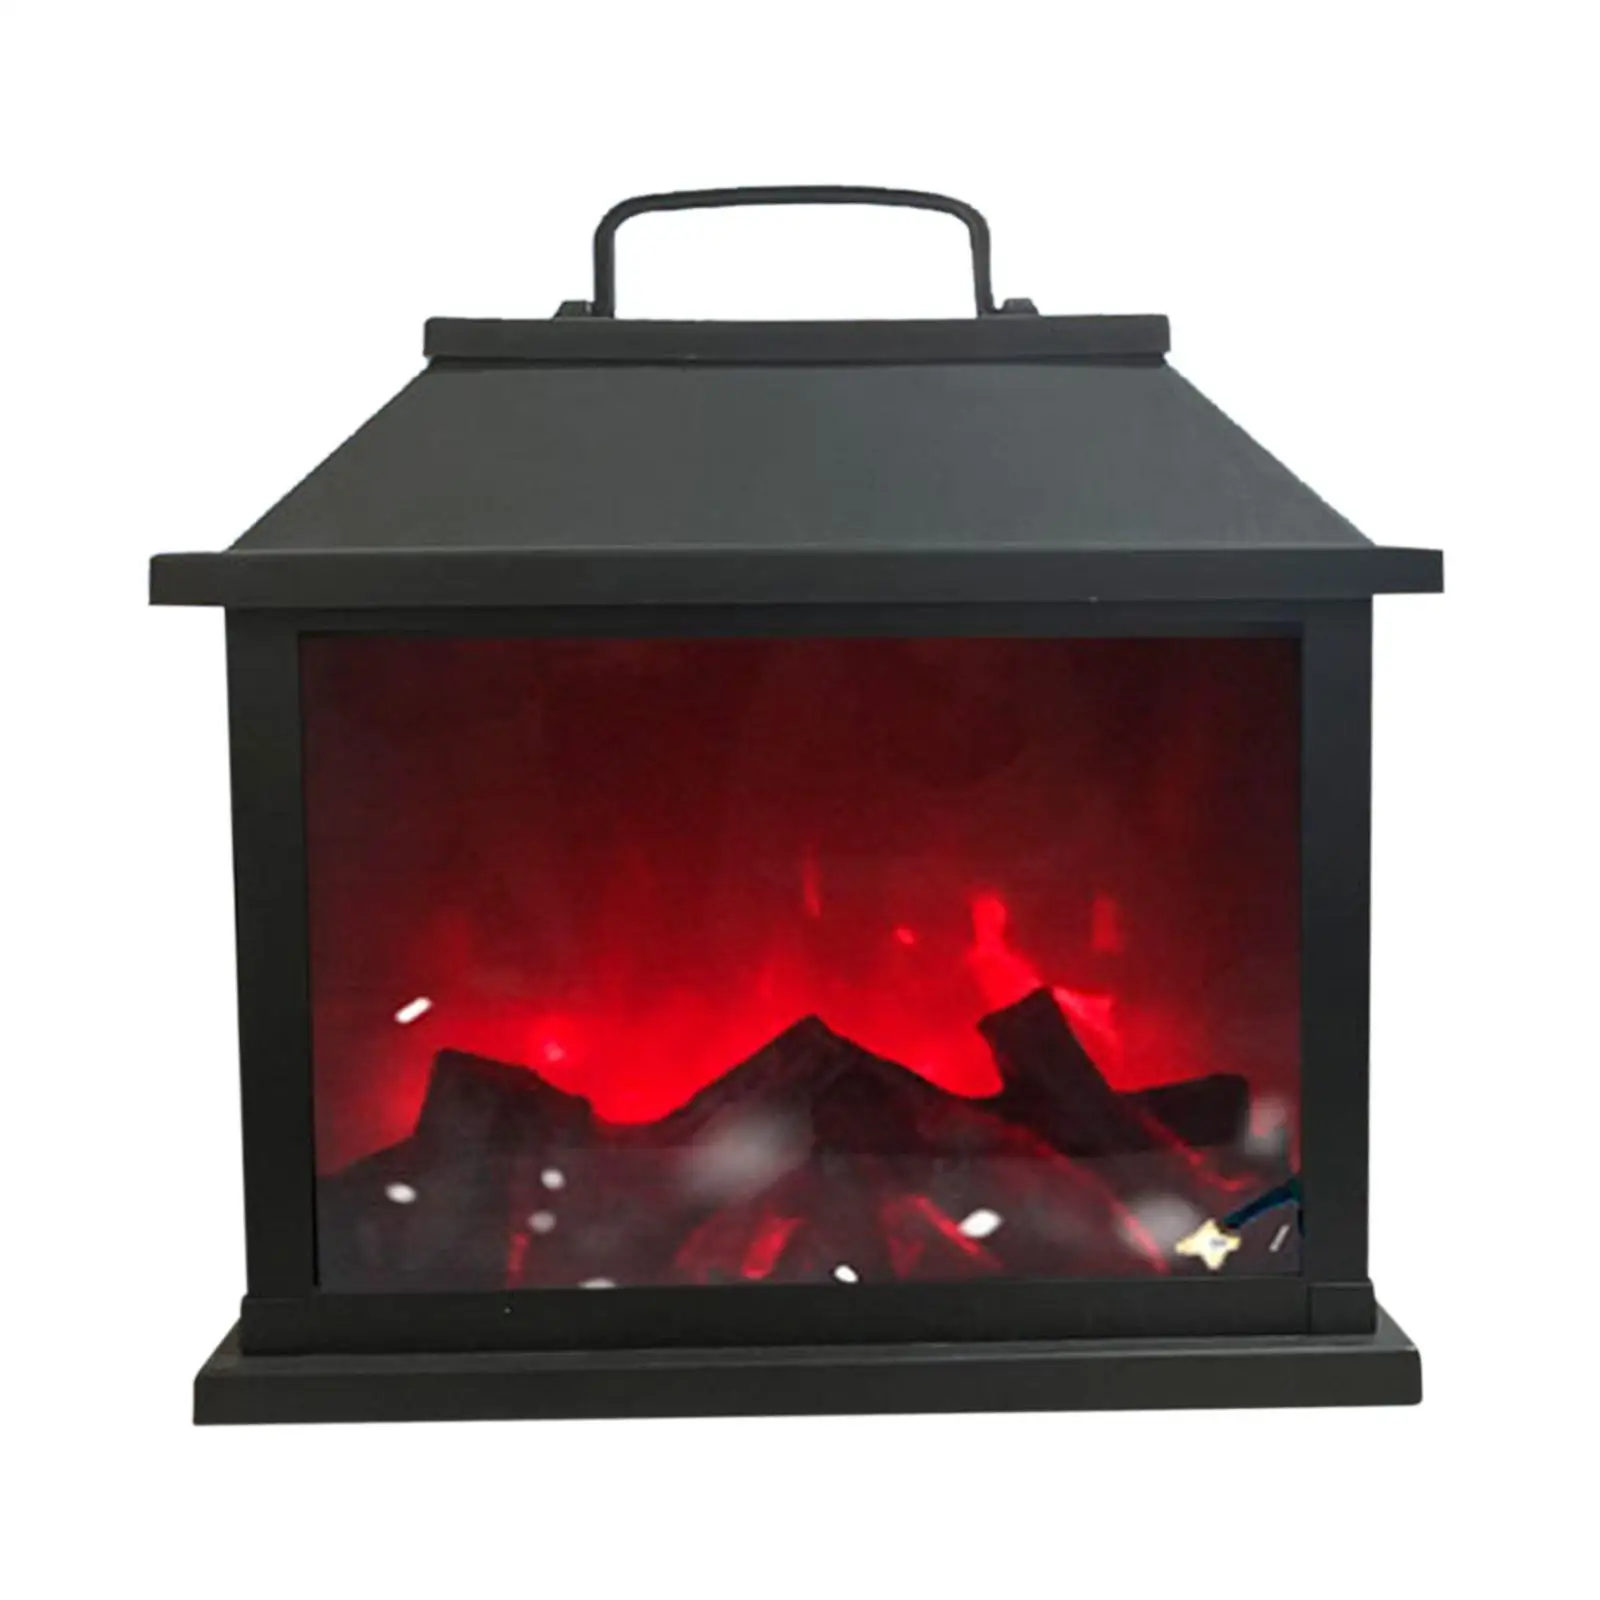 Fireplace Lantern Battery/USB Operated Decorative LED Fire Lamp Centerpiece Vintage Style Tabletop Lamp for Indoor & Outdoor Use